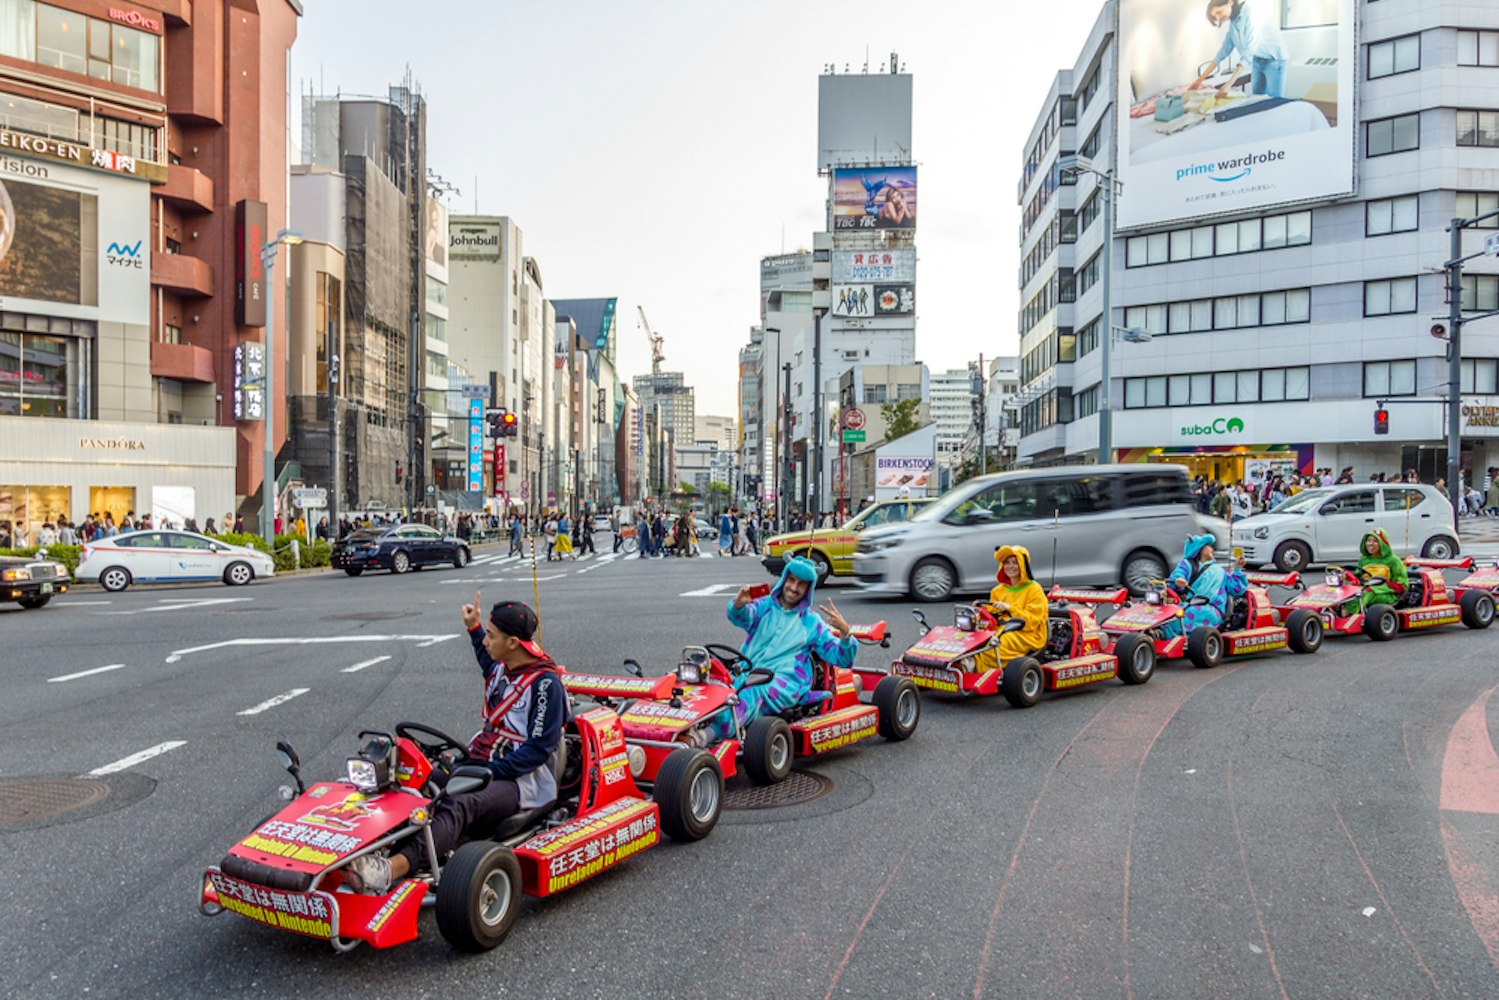 Cosplayers doing a kart tour in the city